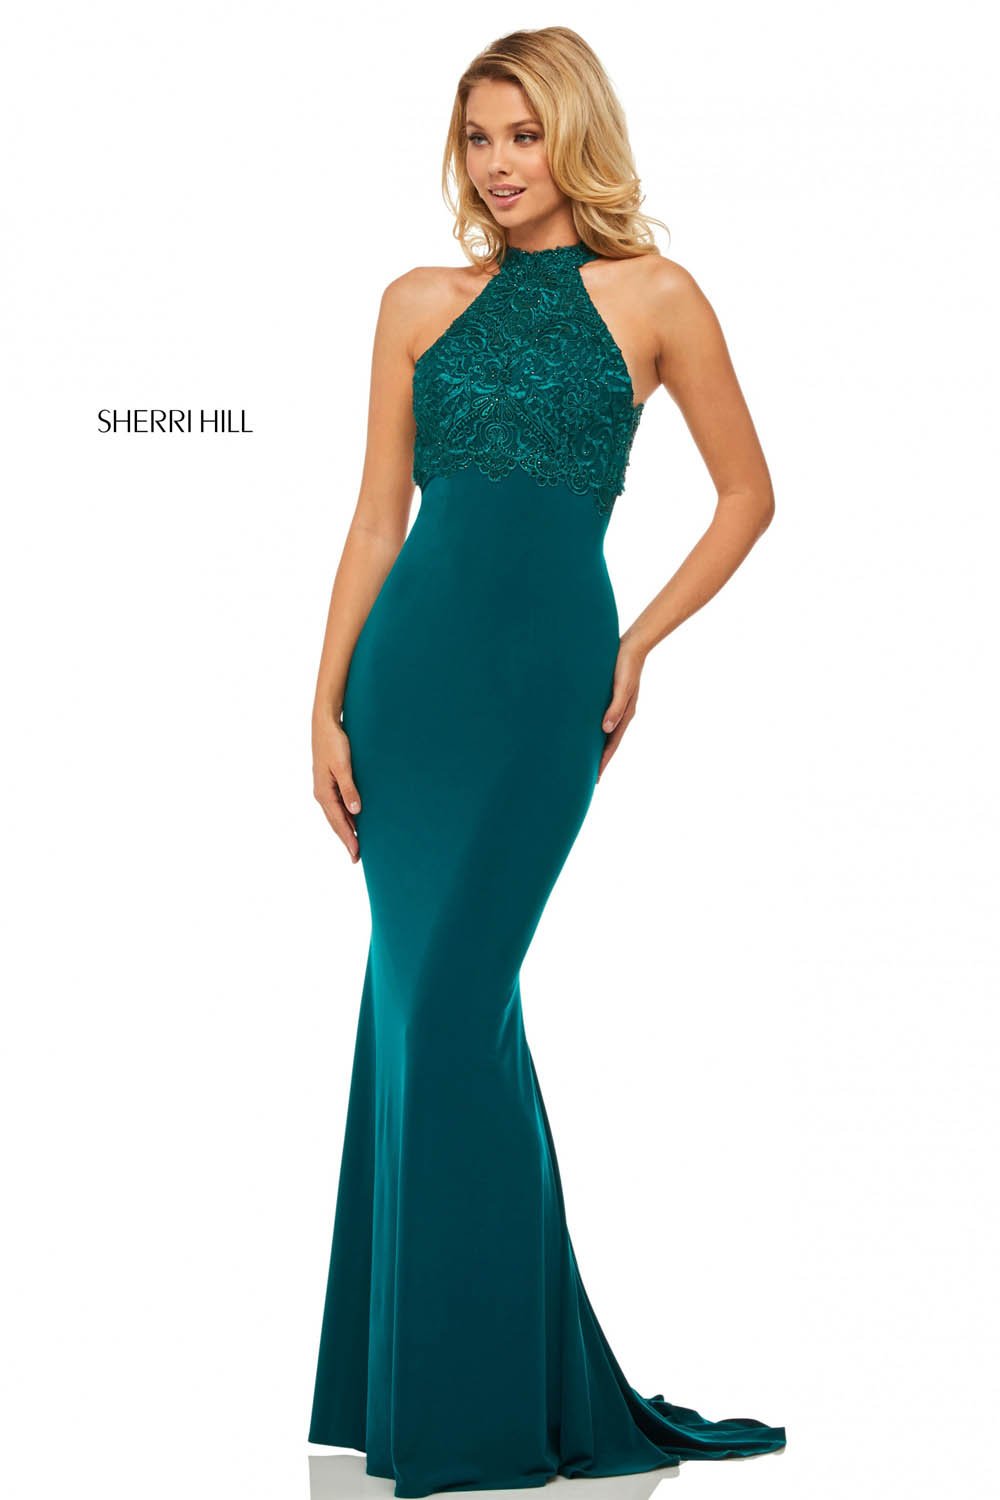 Sherri Hill 52901 dress images in these colors: Wine, Navy, Emerald.